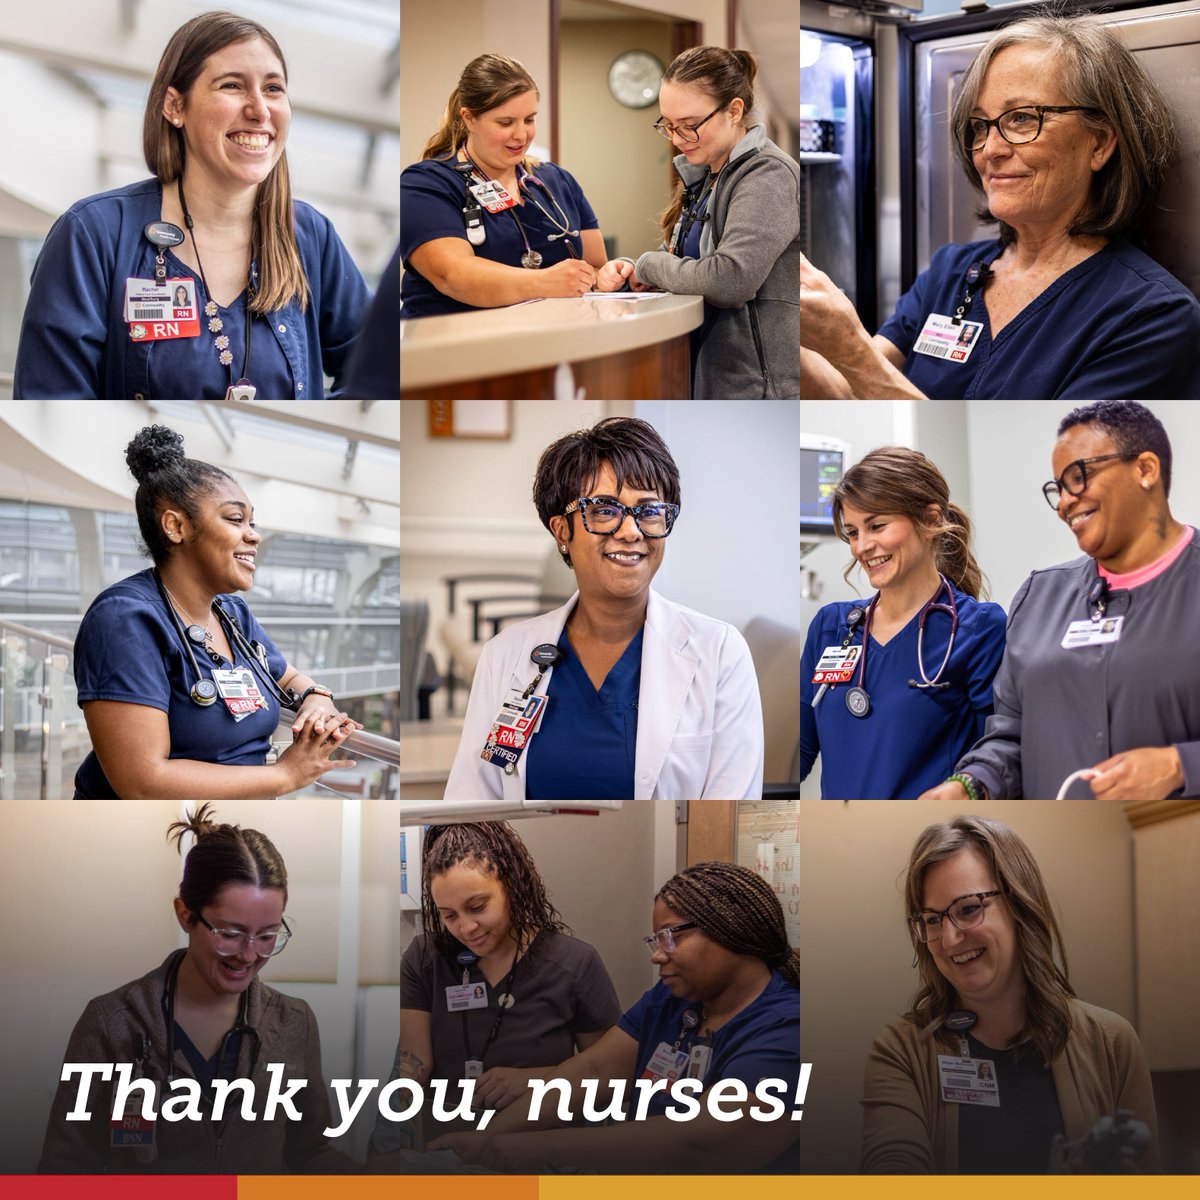 Happy Nurses Week to all healthcare heroes at every Community Health Network location. This week, and every week, we celebrate all that you do. Thank you for your selflessness and contributions to the well-being of others. #NationalNursesWeek #NurseAppreciation